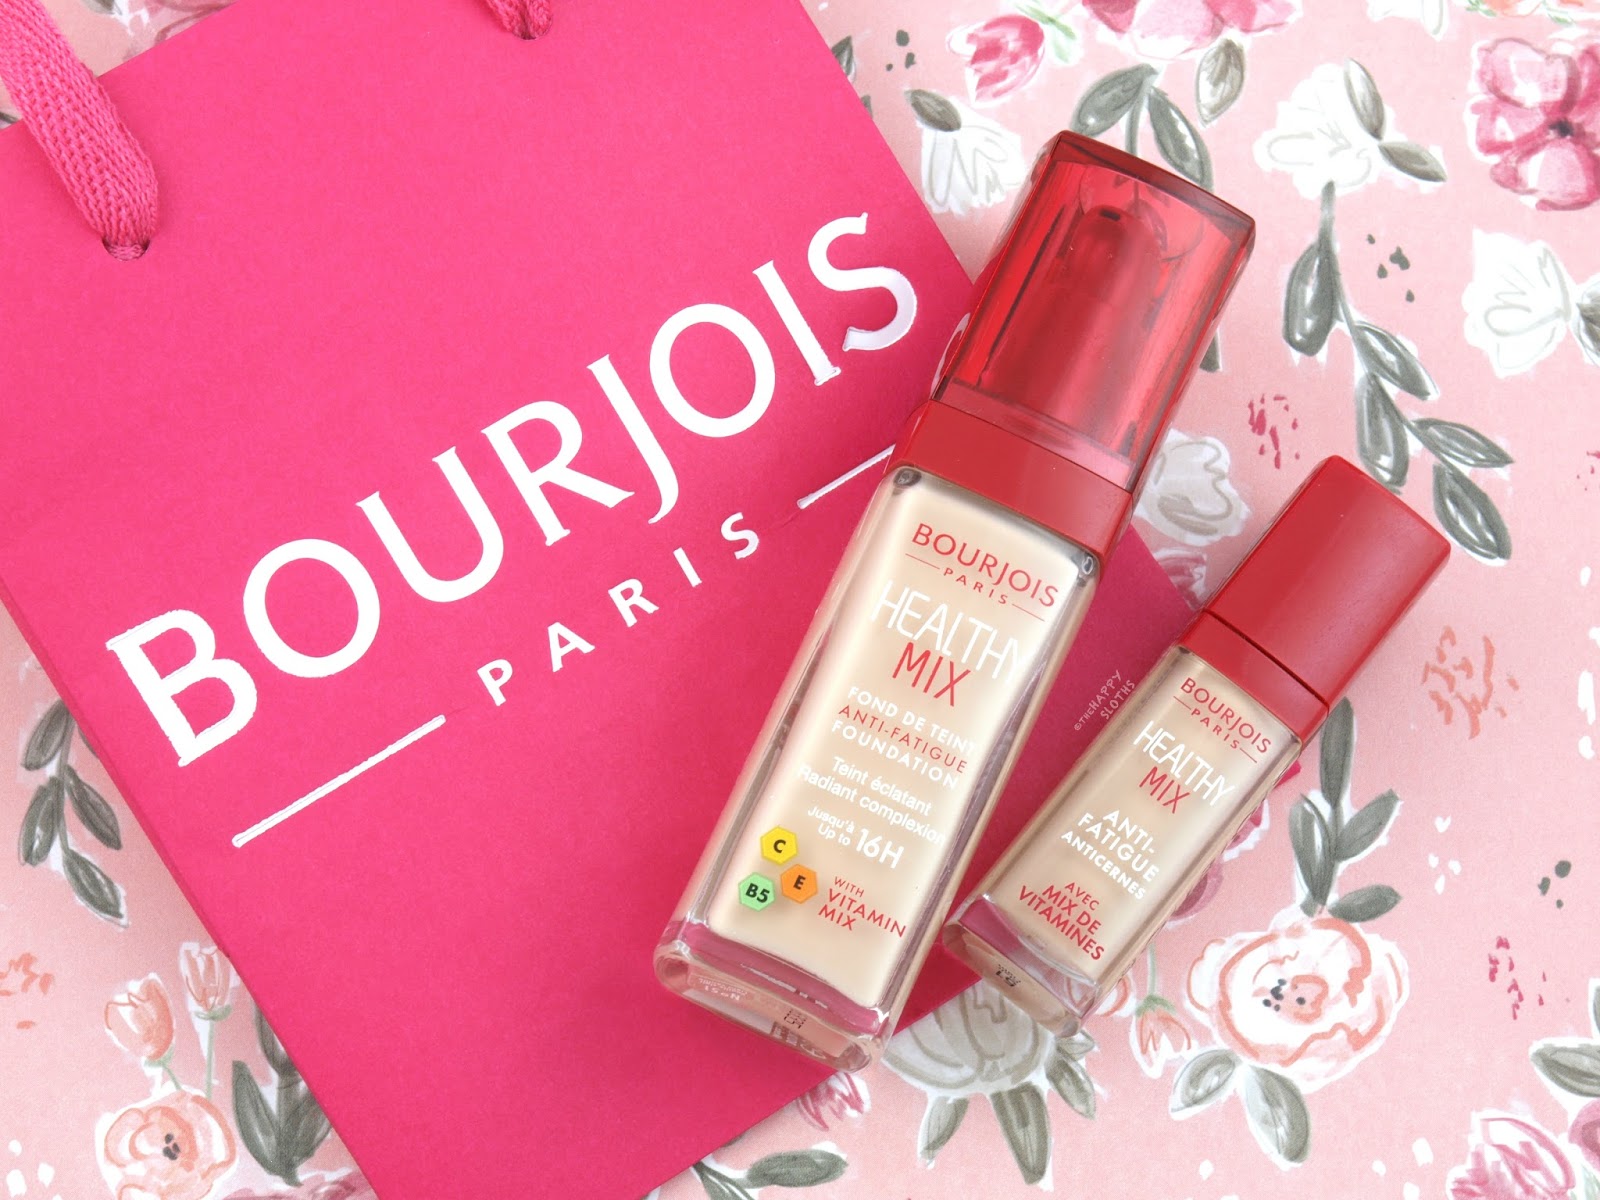 Bourjois Healthy Mix Anti-Fatigue Foundation & Concealer: Review and Swatches